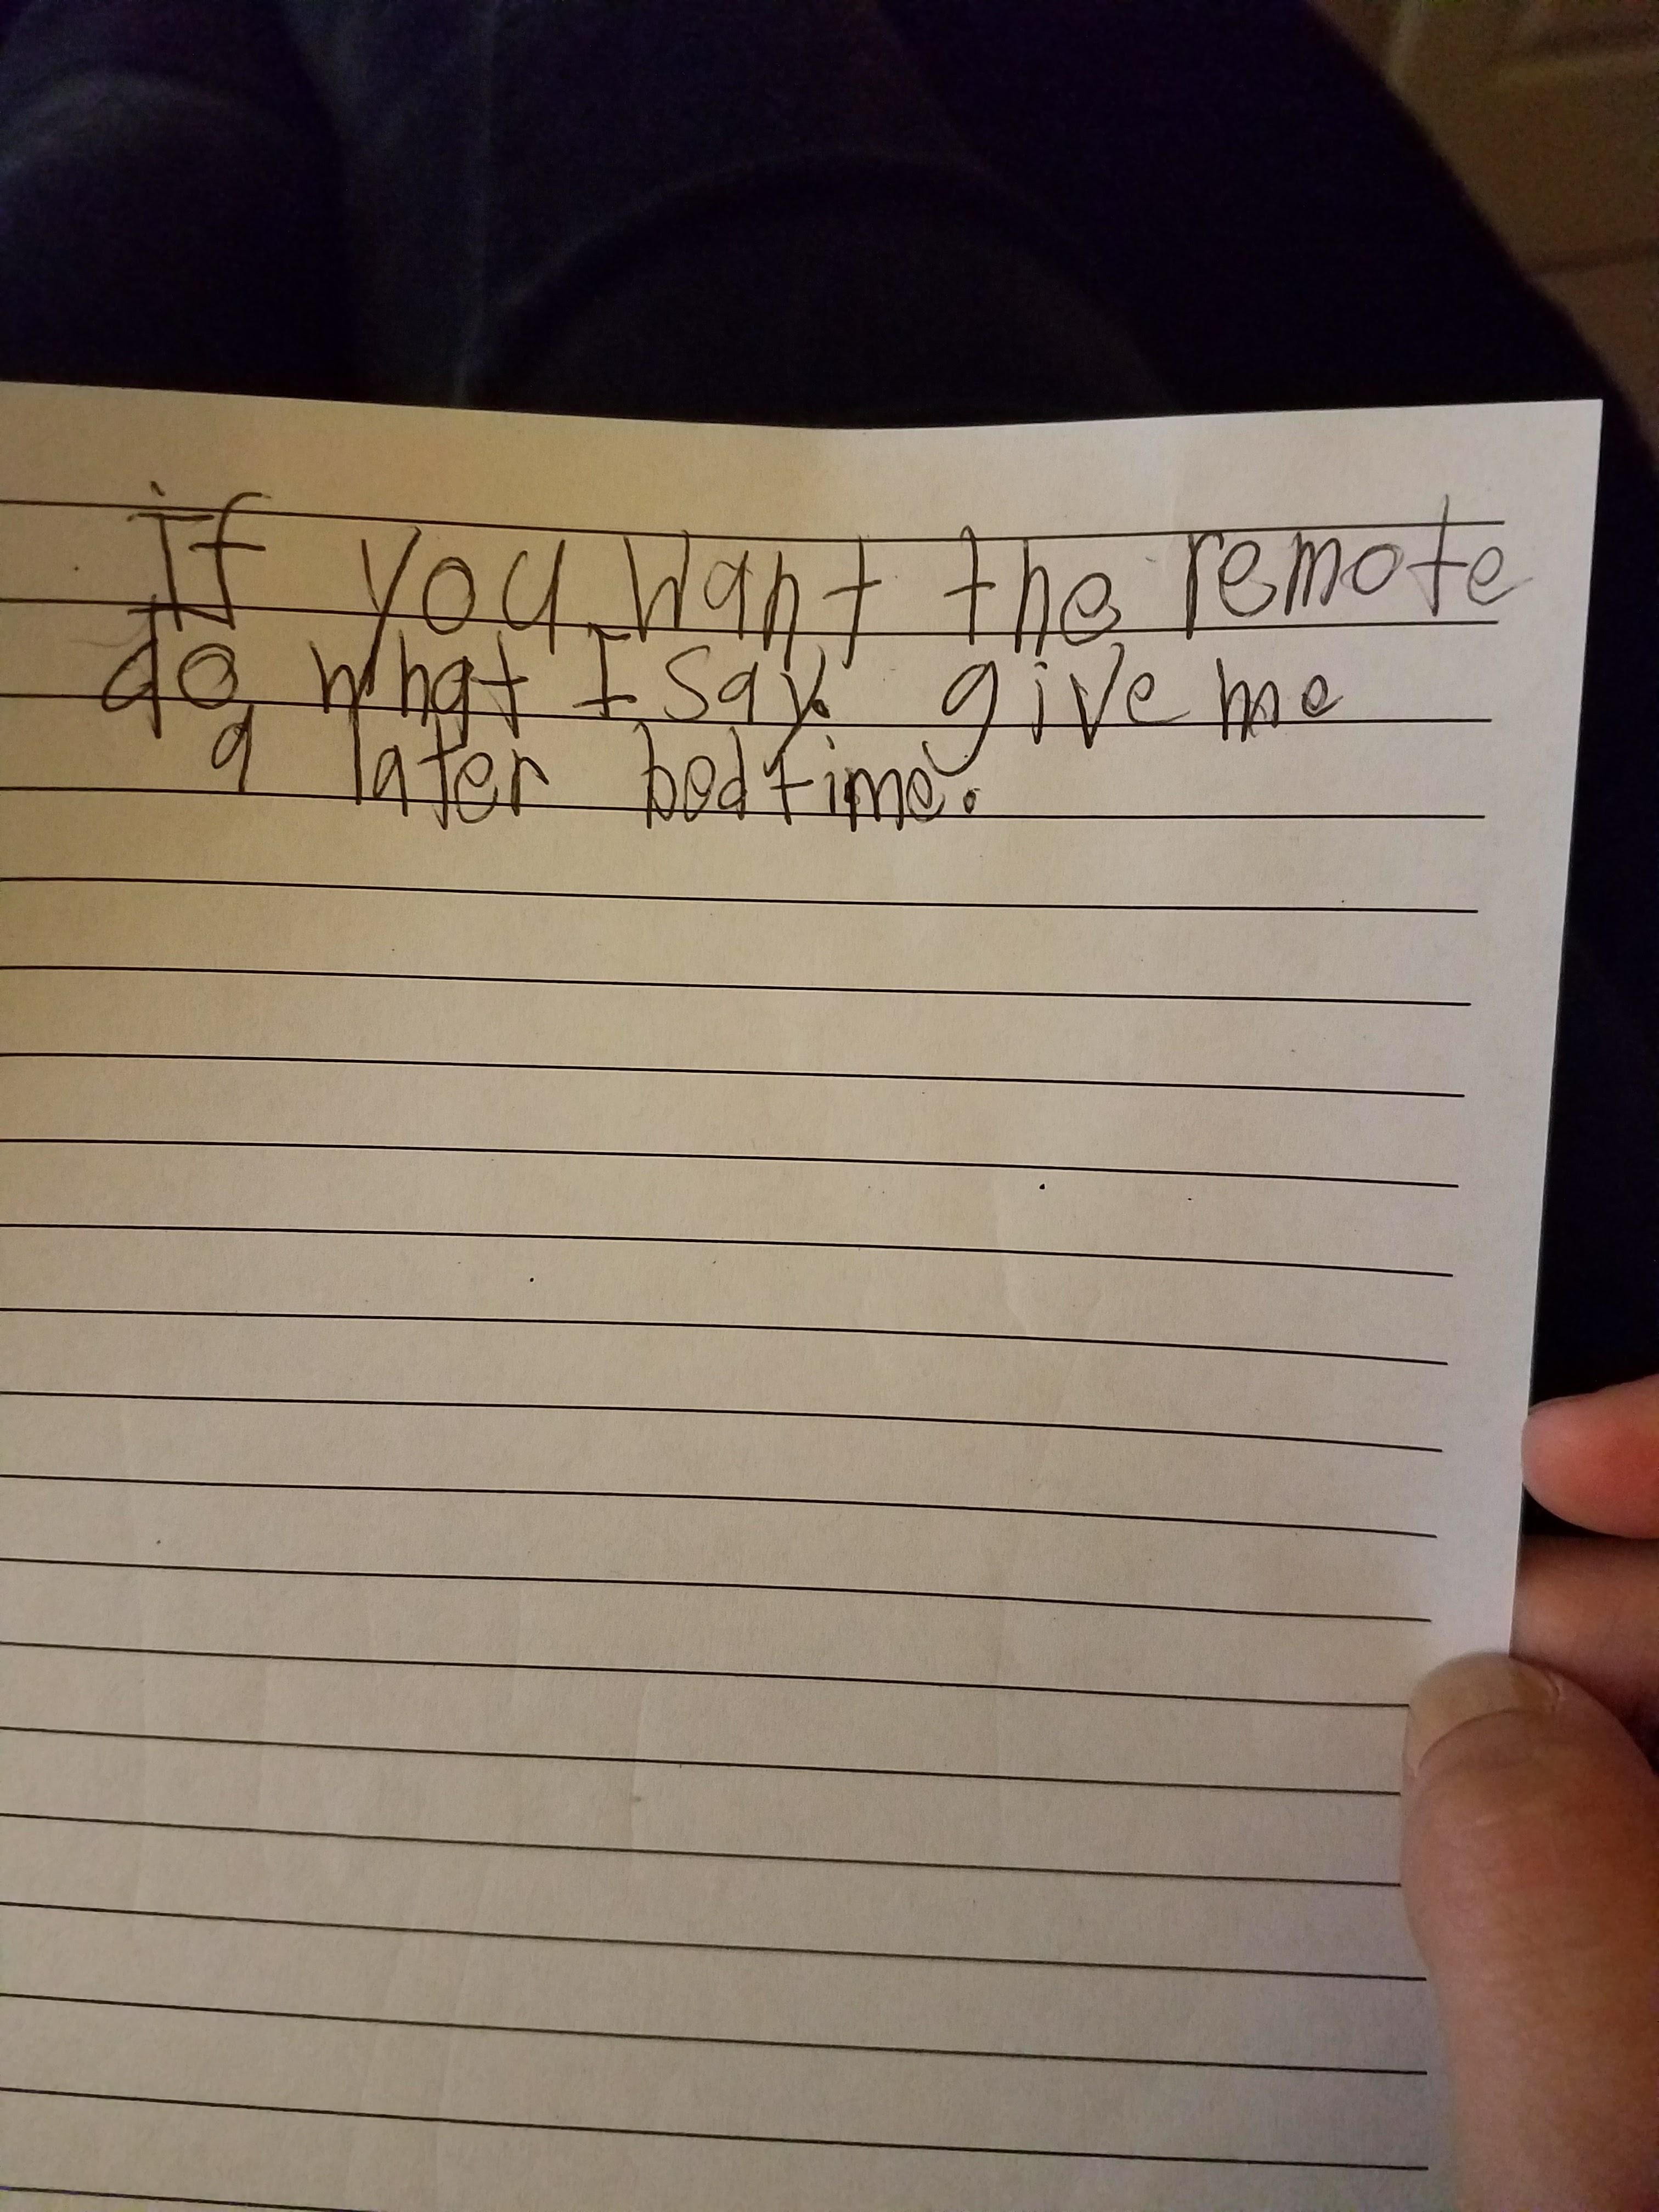 So our 7 year old just left this on our bed...